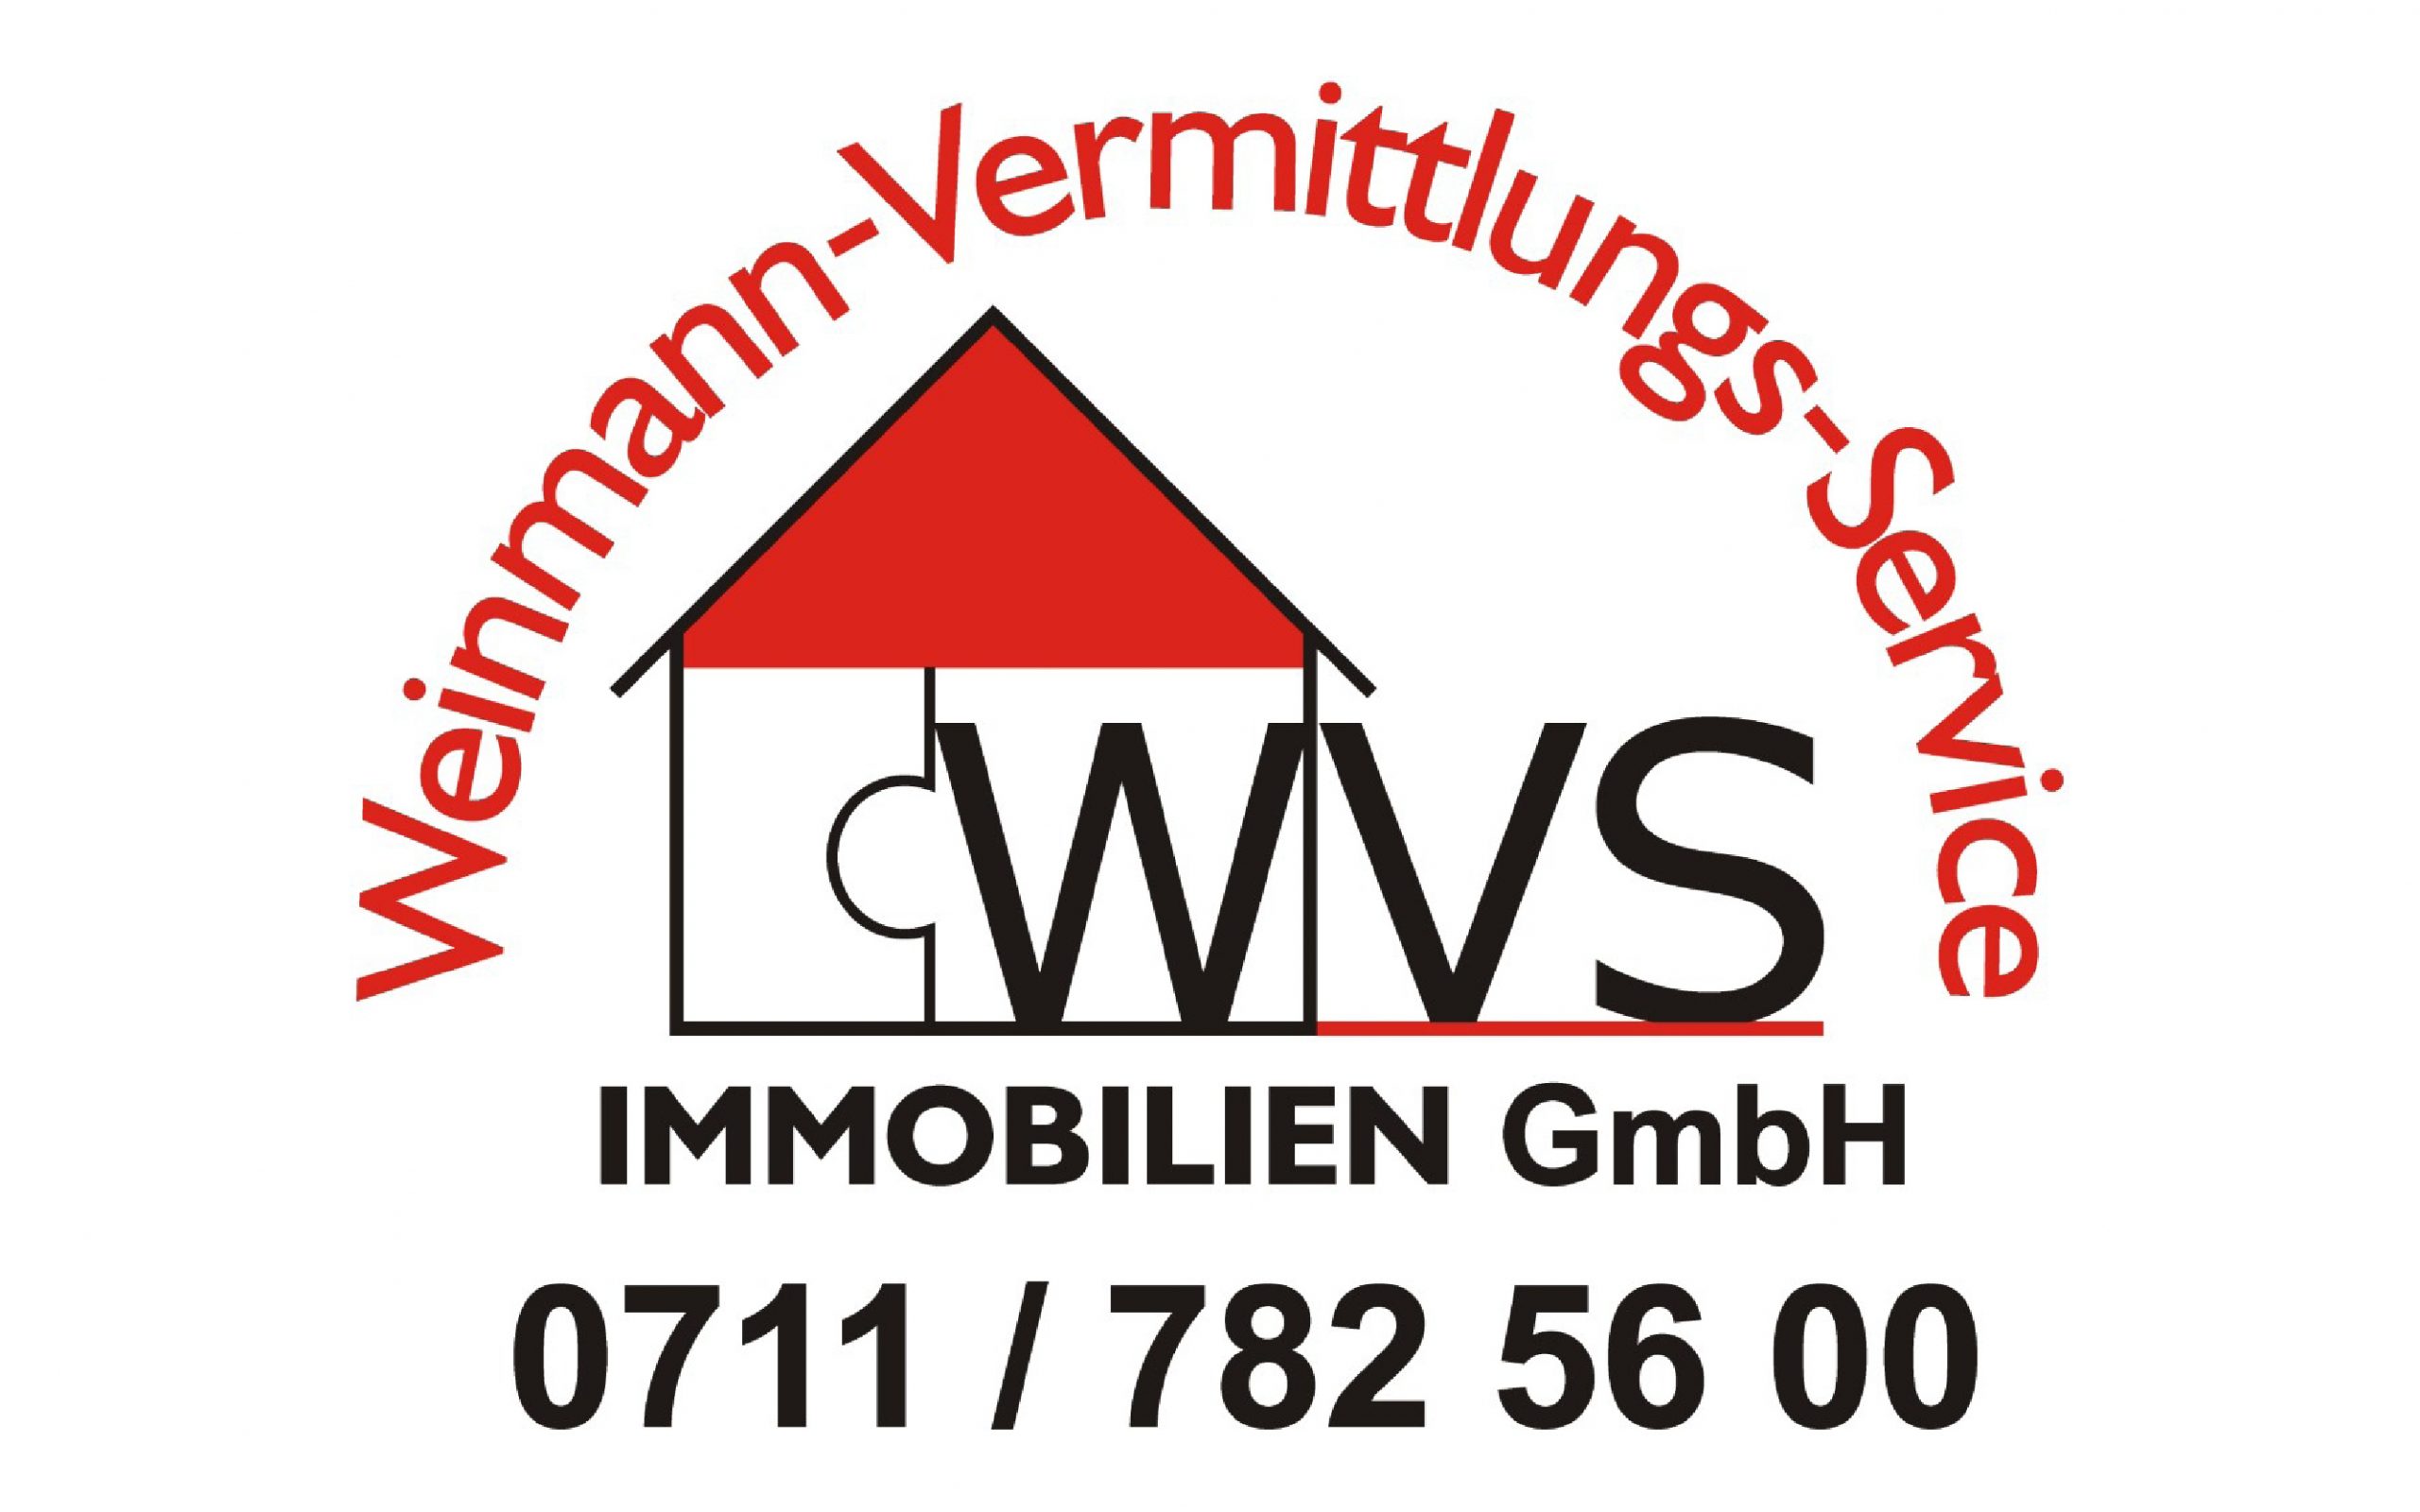 WVS Immobilien GmbH